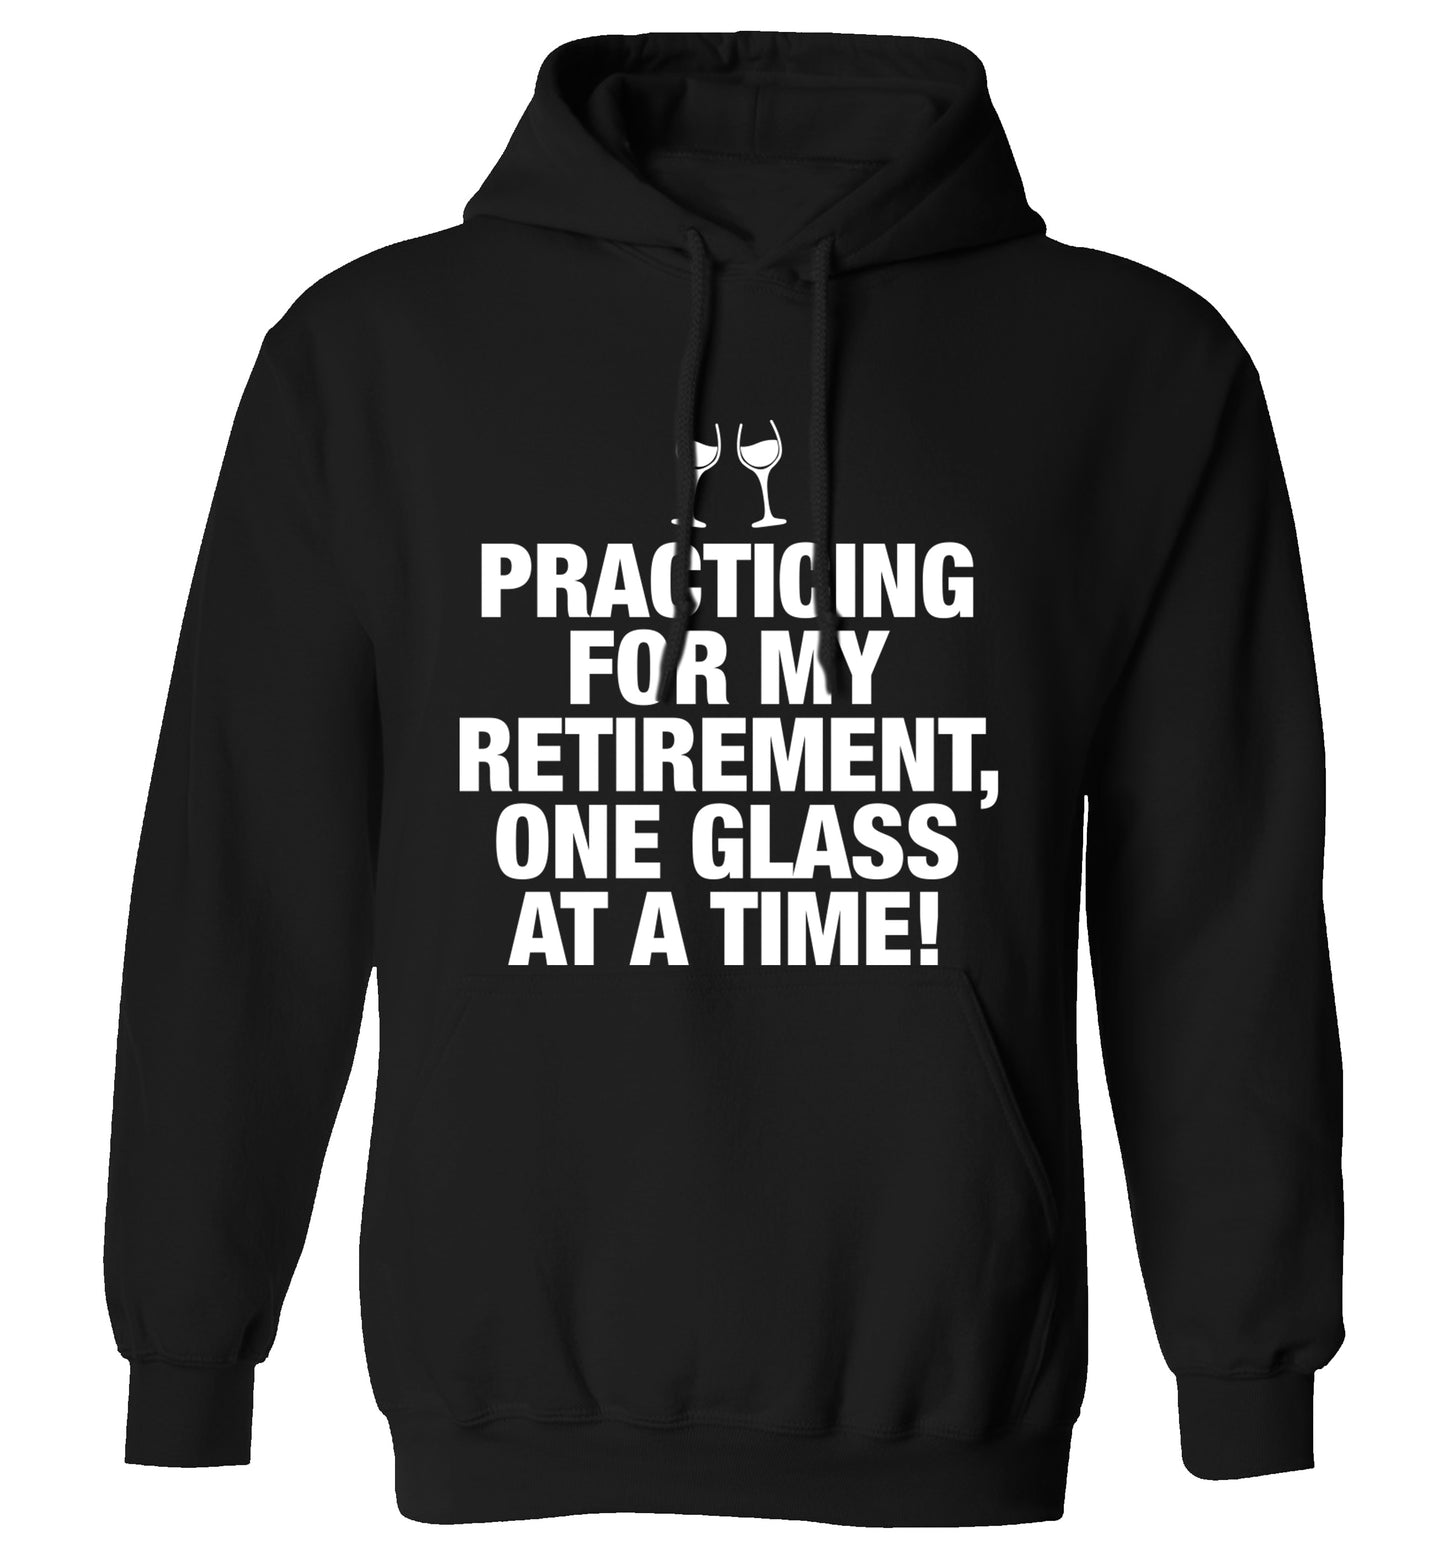 Practicing my retirement one glass at a time adults unisex black hoodie 2XL